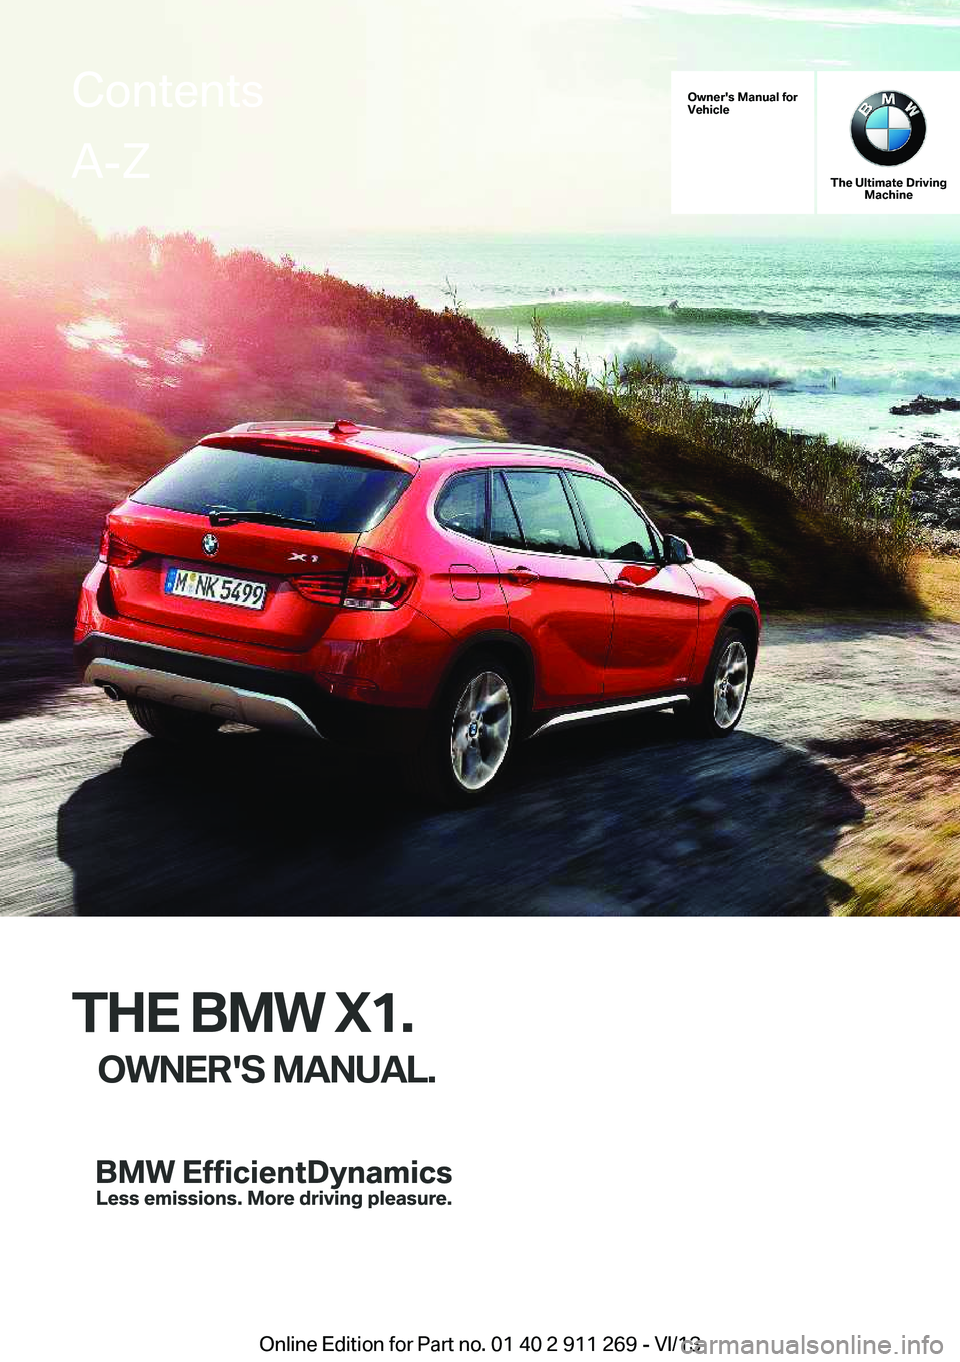 BMW X1 XDRIVE 35I 2014  Owners Manual Owner's Manual for
Vehicle
The Ultimate Driving Machine
THE BMW X1.
OWNER'S MANUAL.
ContentsA-Z
Online Edition for Part no. 01 40 2 911 269 - VI/13   